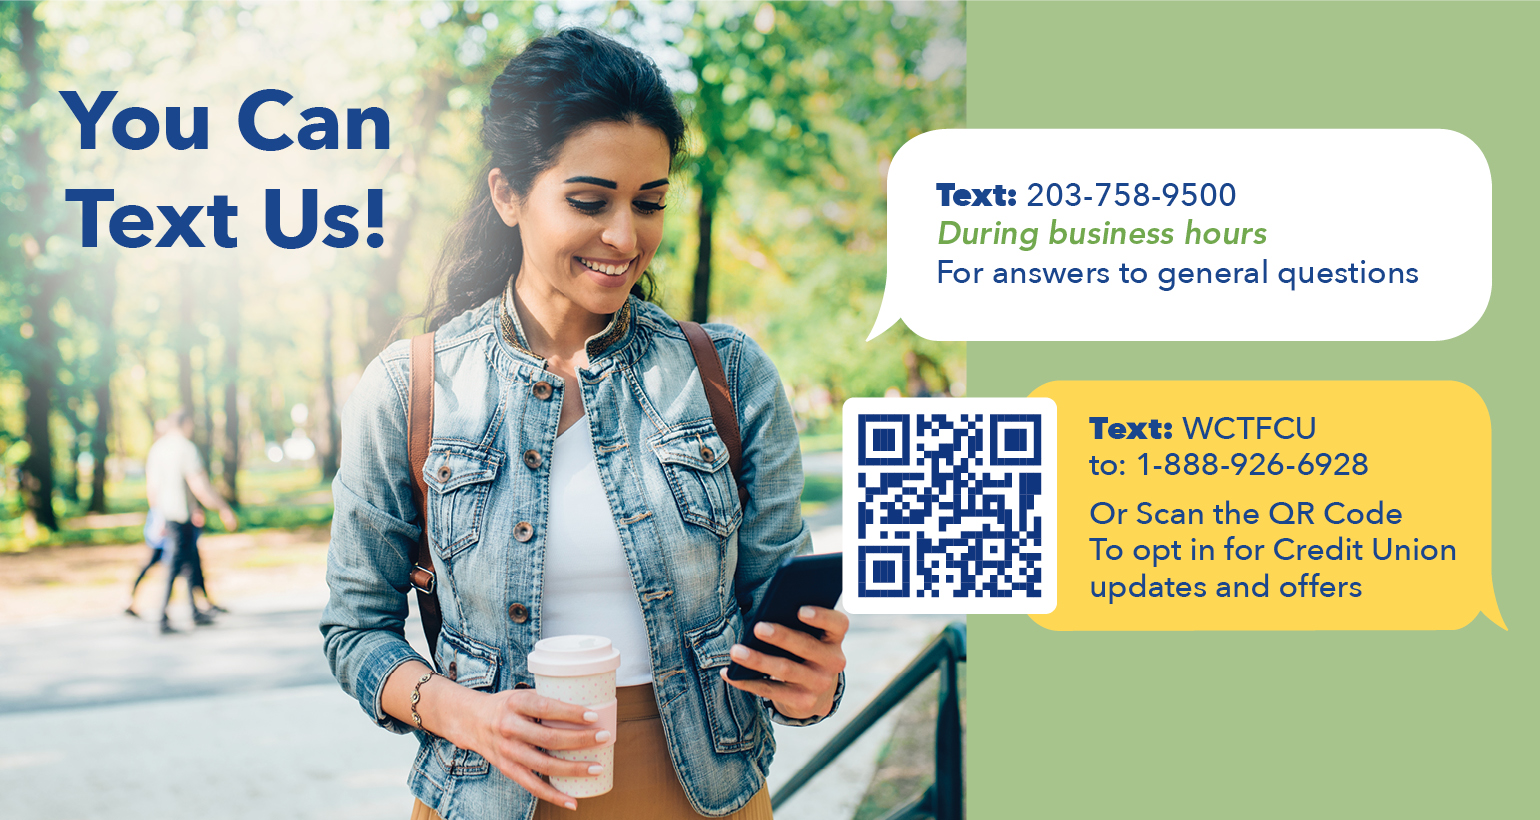 You can text us! Text: 203-758-9500 during business hours for answers to general questions Text: WCTFCU to: 1-888-926-6928 or scan the qr code to opt in for credit union updates and offers